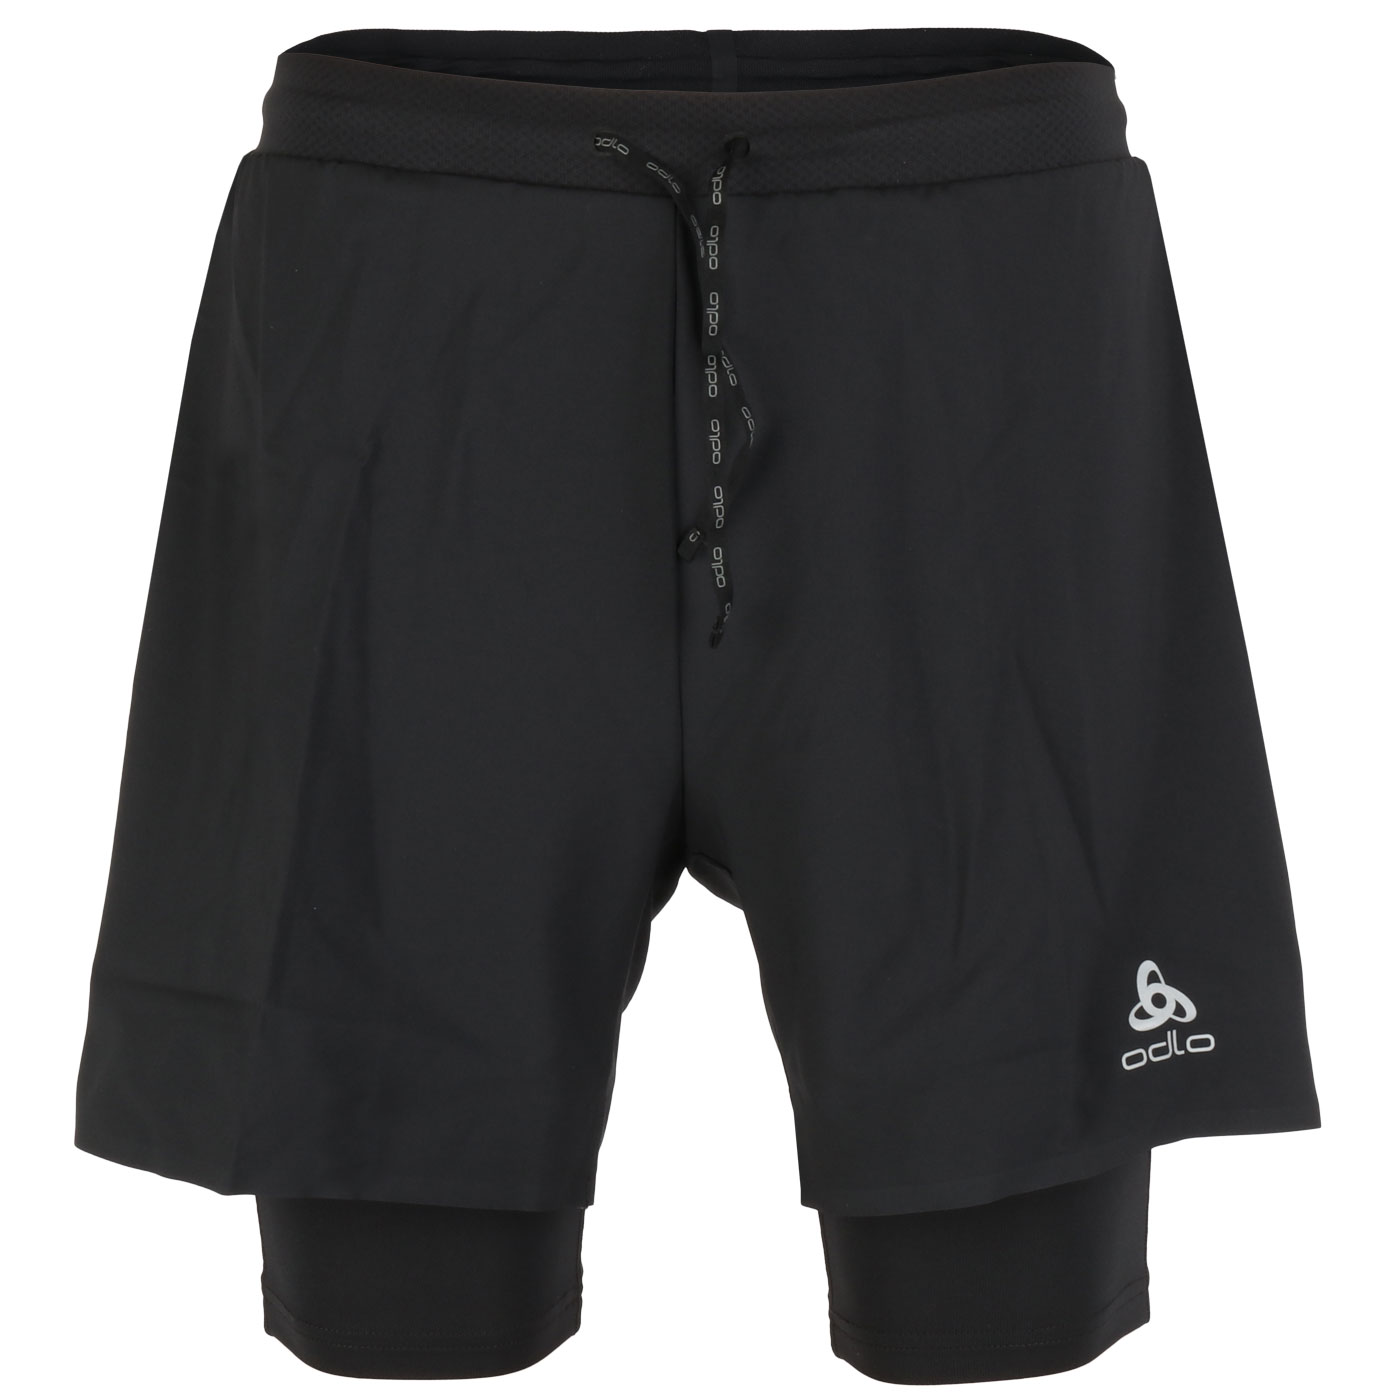 Picture of Odlo X-Alp 6 Inch 2-in-1 Trail Running Shorts Men - black